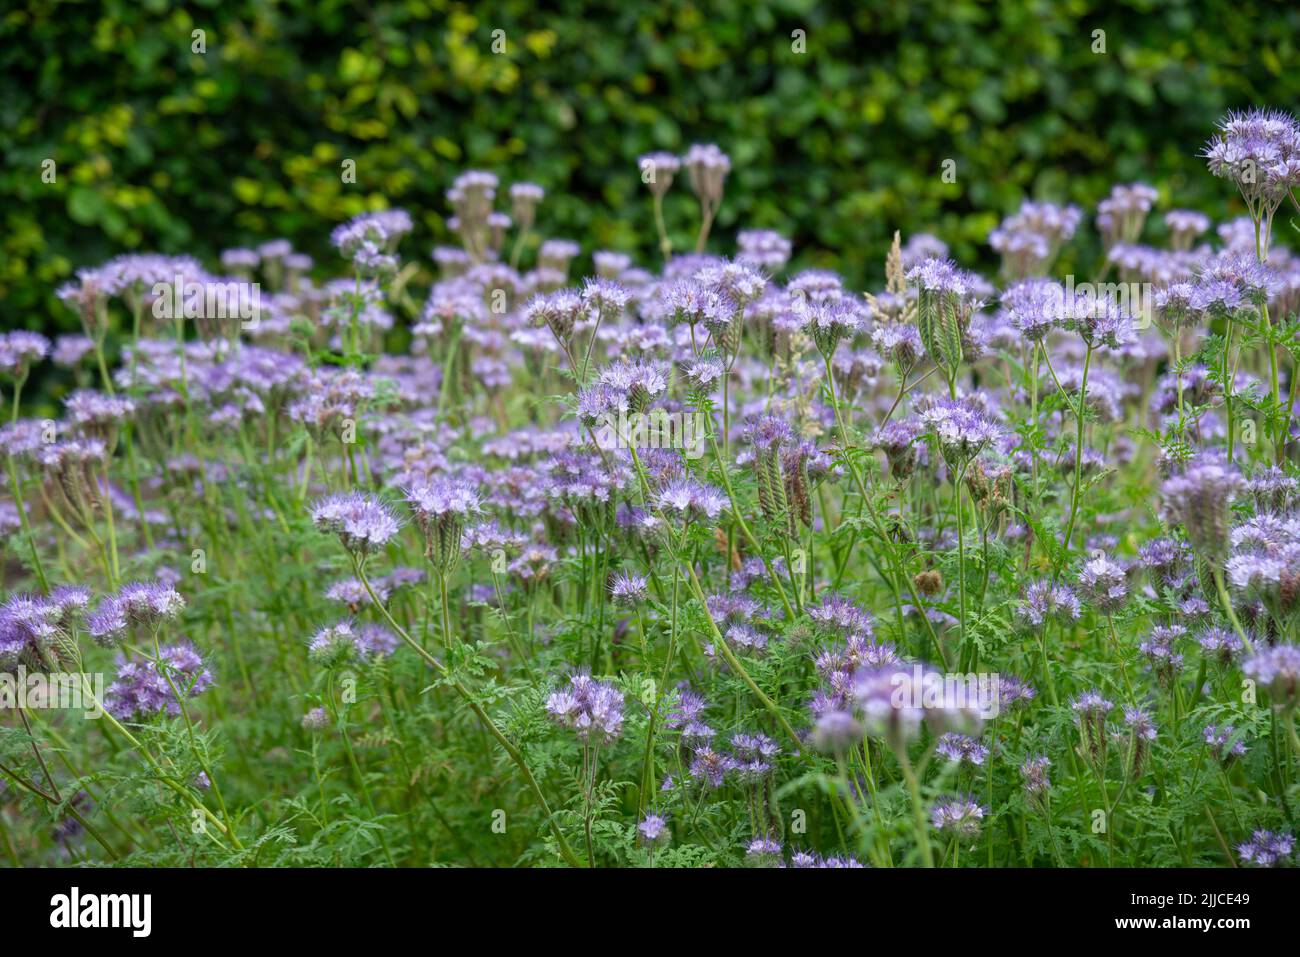 Phacelia Tanacetifolia (lacy phacelia) in full flower in mid summer. Used in agriculture to attract pollinating insects and as a green manure. Stock Photo